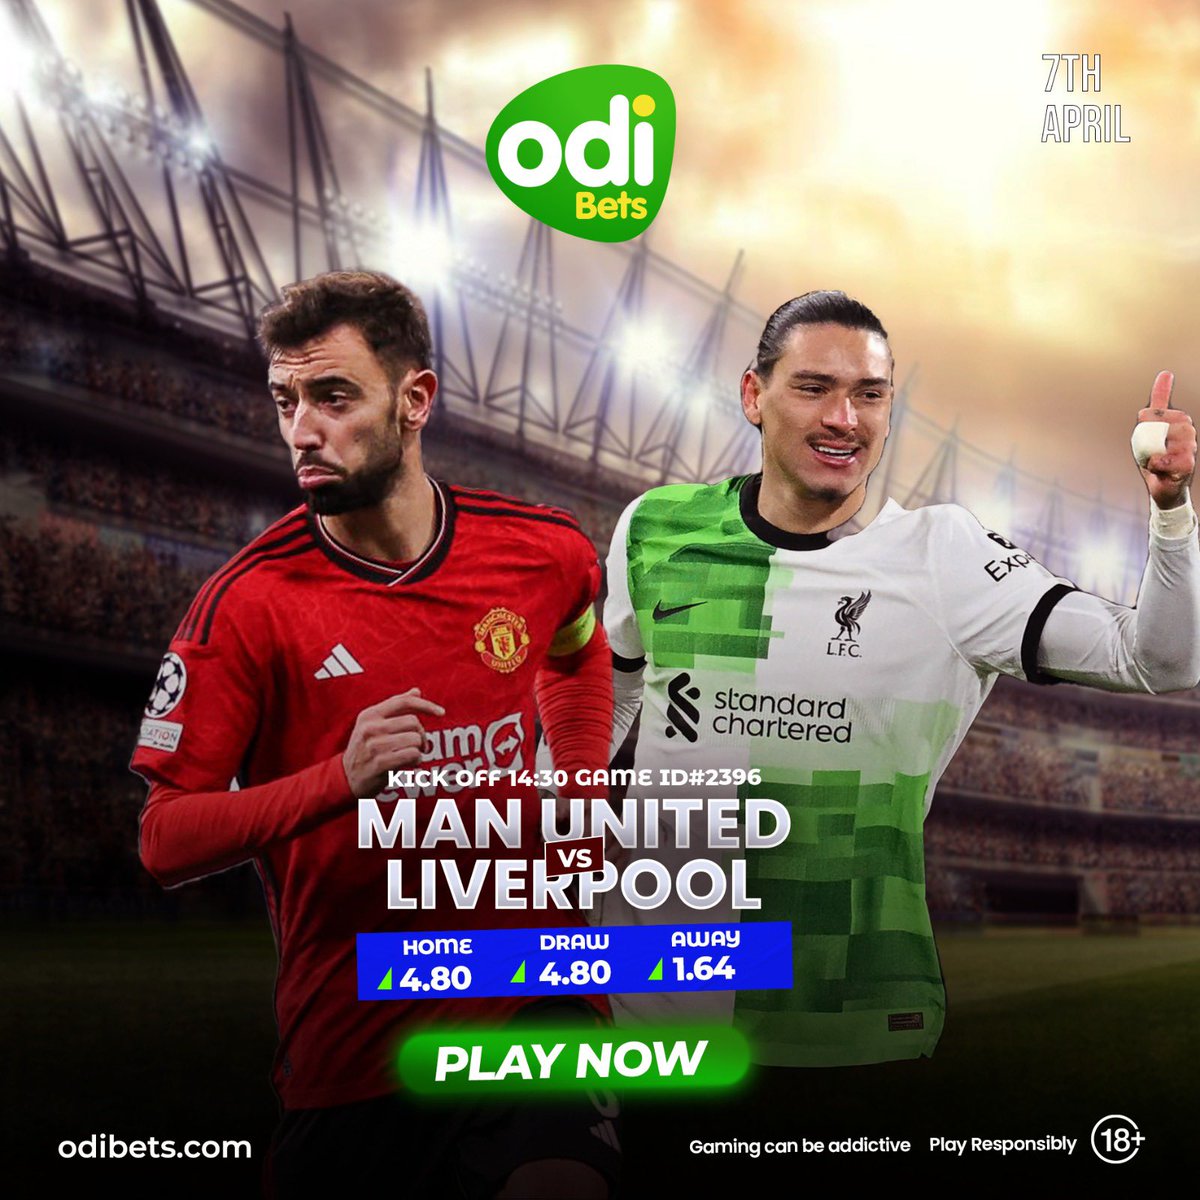 TIC TOC ⏰ 
Manchester United hosts Liverpool this afternoon at Old Trafford for the #EPL 🔥
Who wins? 

Enjoy the best BOOSTED ODDS 📲 odibets.com.gh 

Ghana’s best betting experience! 
#BetExtraODInary